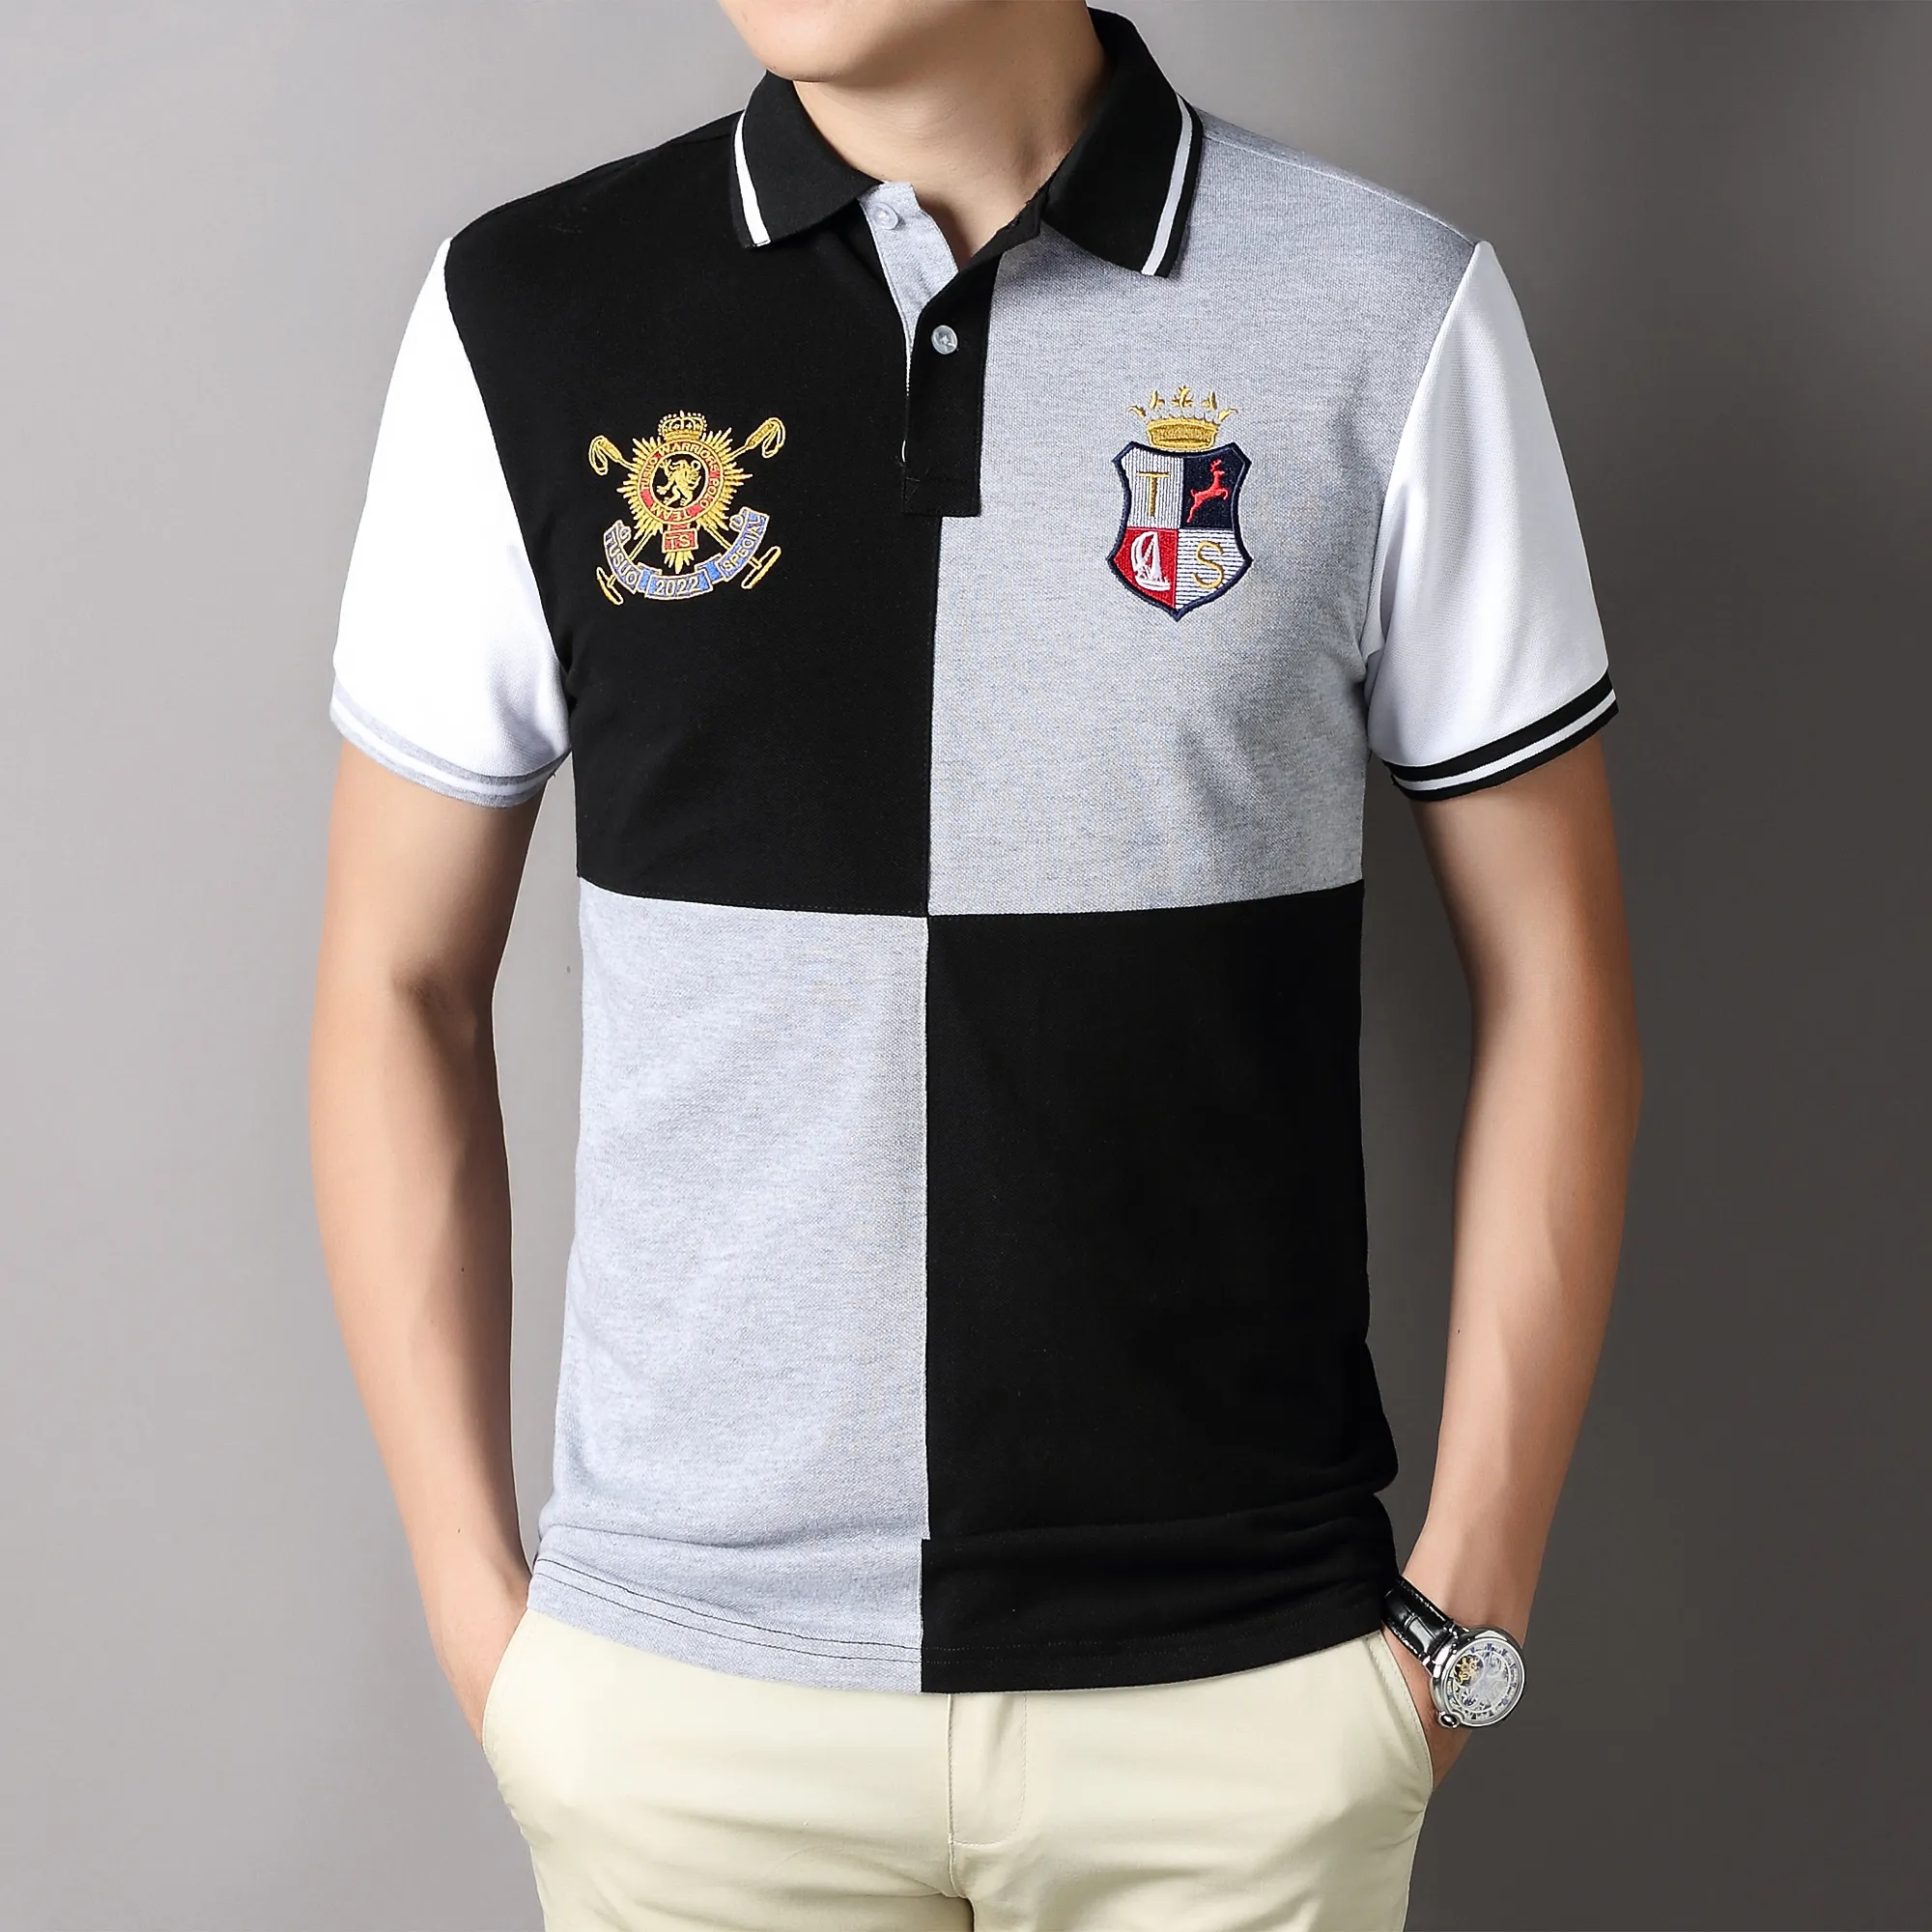 Turn-down Collar and Embroidered POLO Shirt, New Choice for Men's Pure Cotton Short-sleeved T-shirt, Casual Wear in Summer, Balancing Fashion and Comfort.